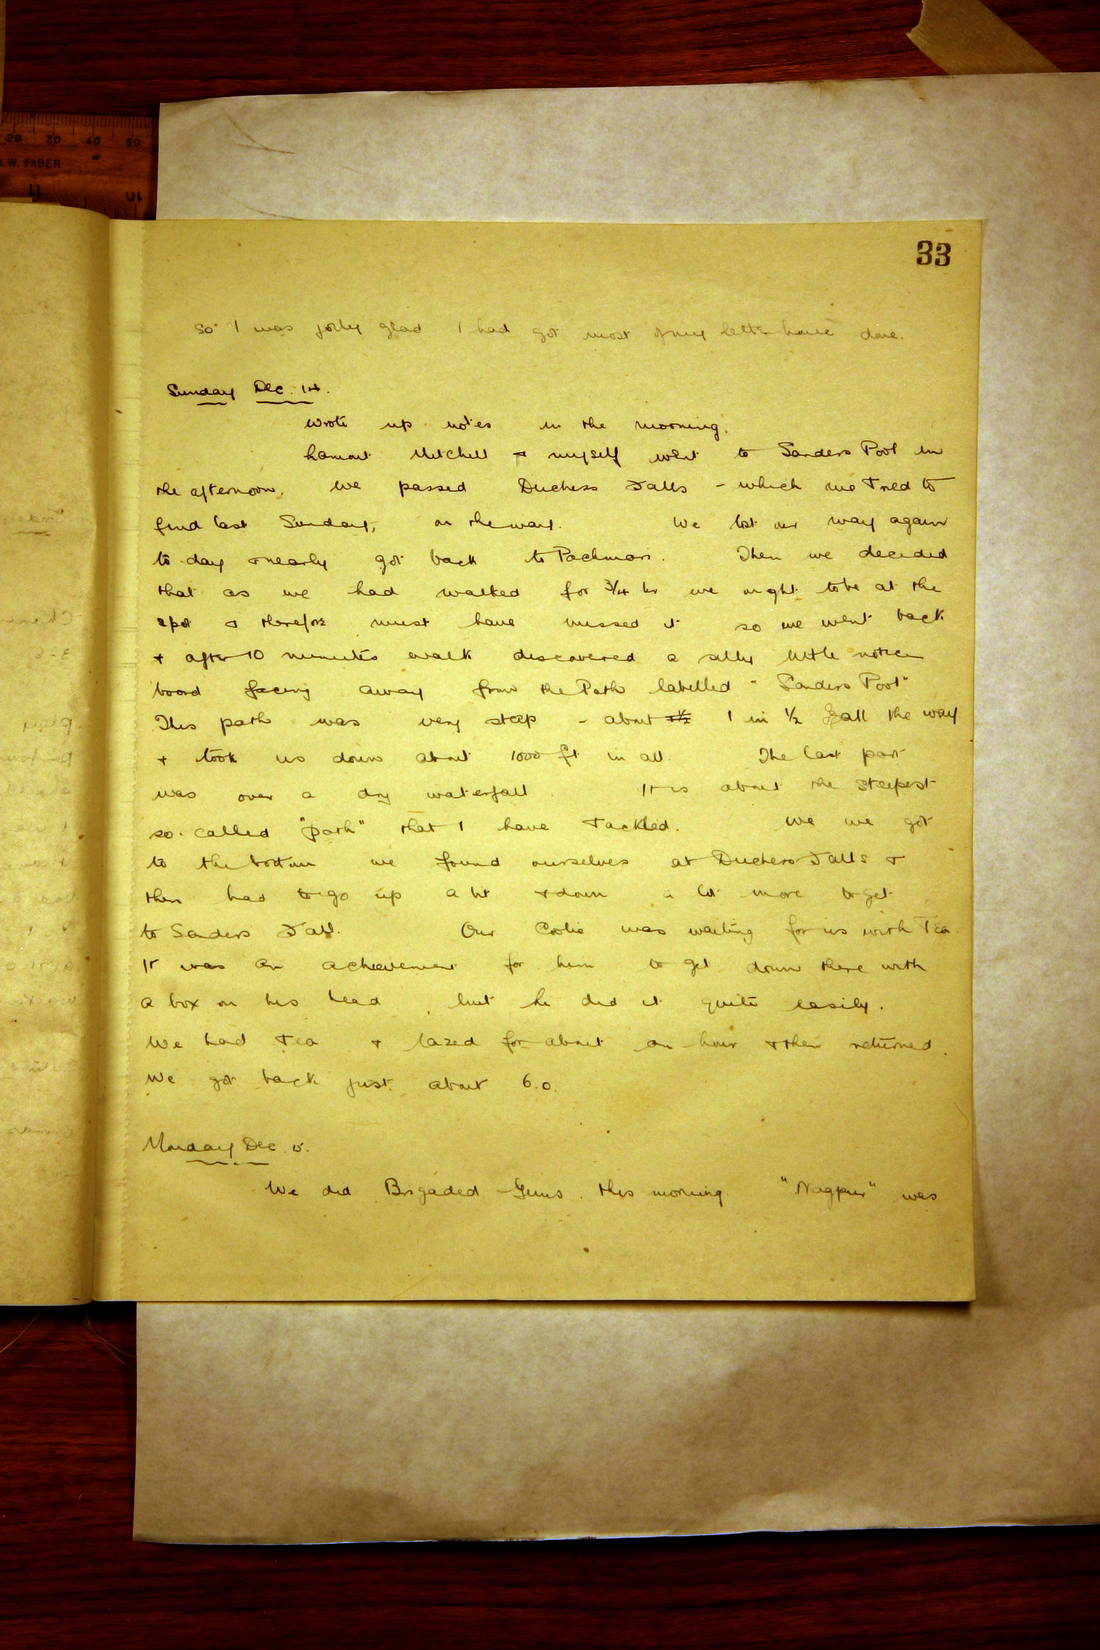 Scanned image of page book11 img_15014.jpg